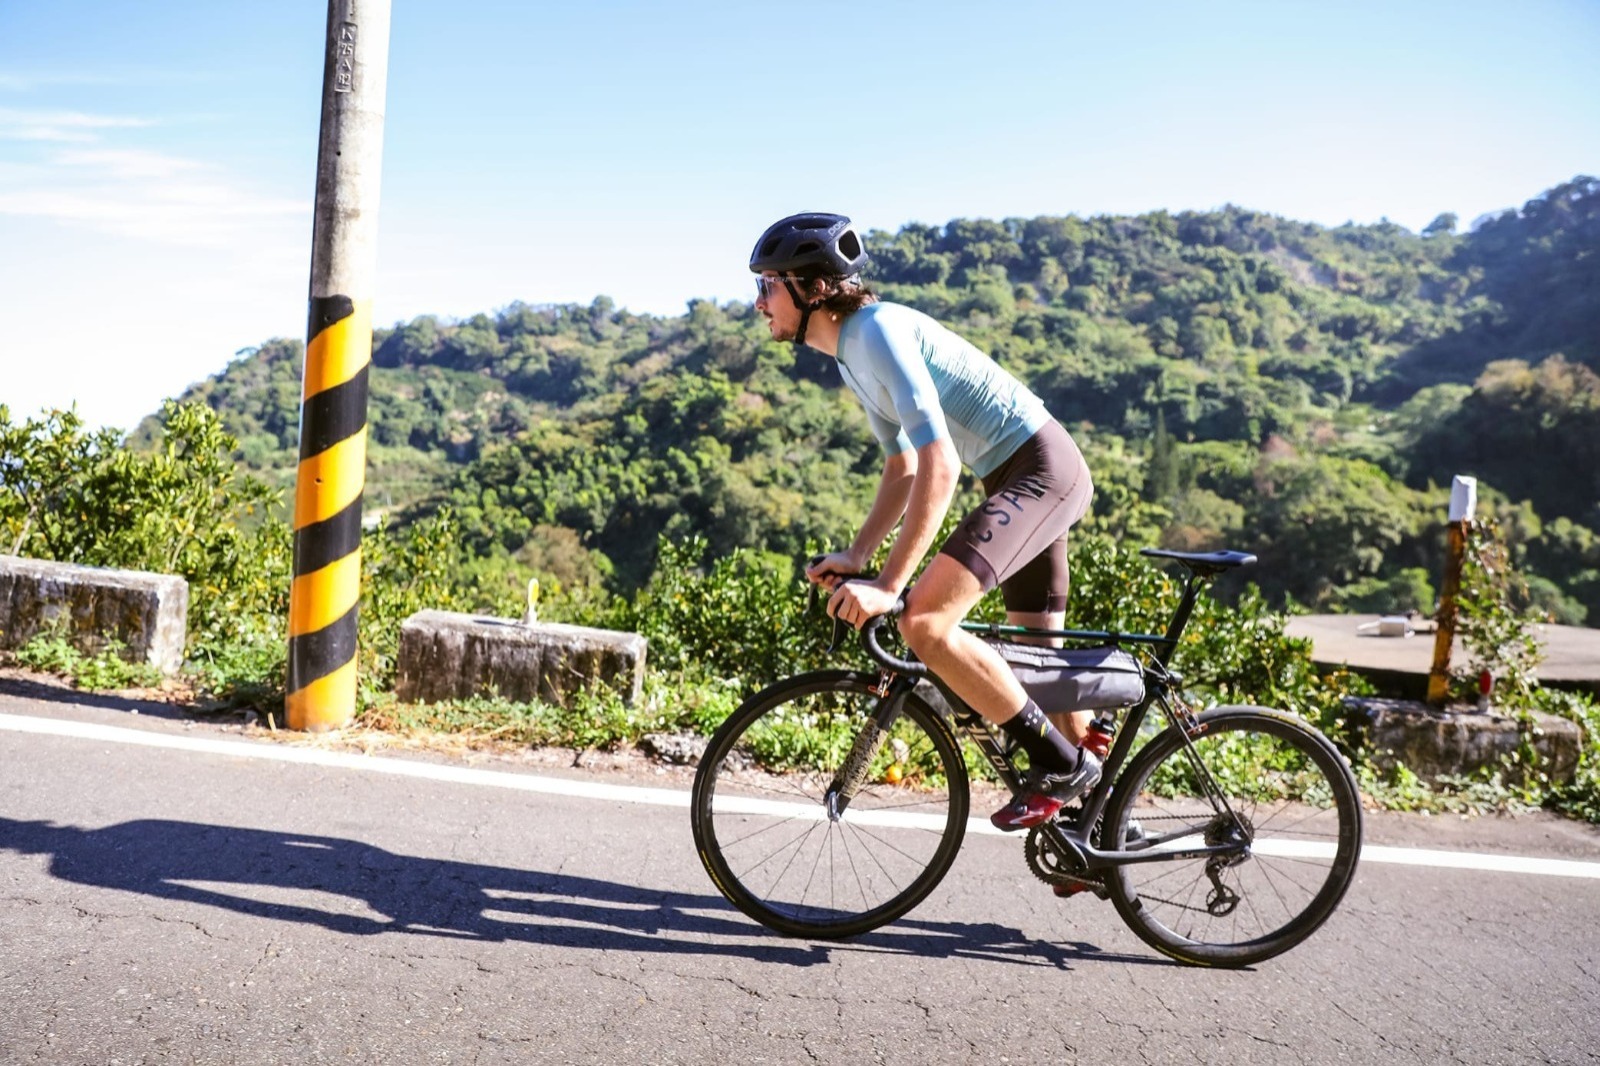 The useful skills for hill climbing on a road bike